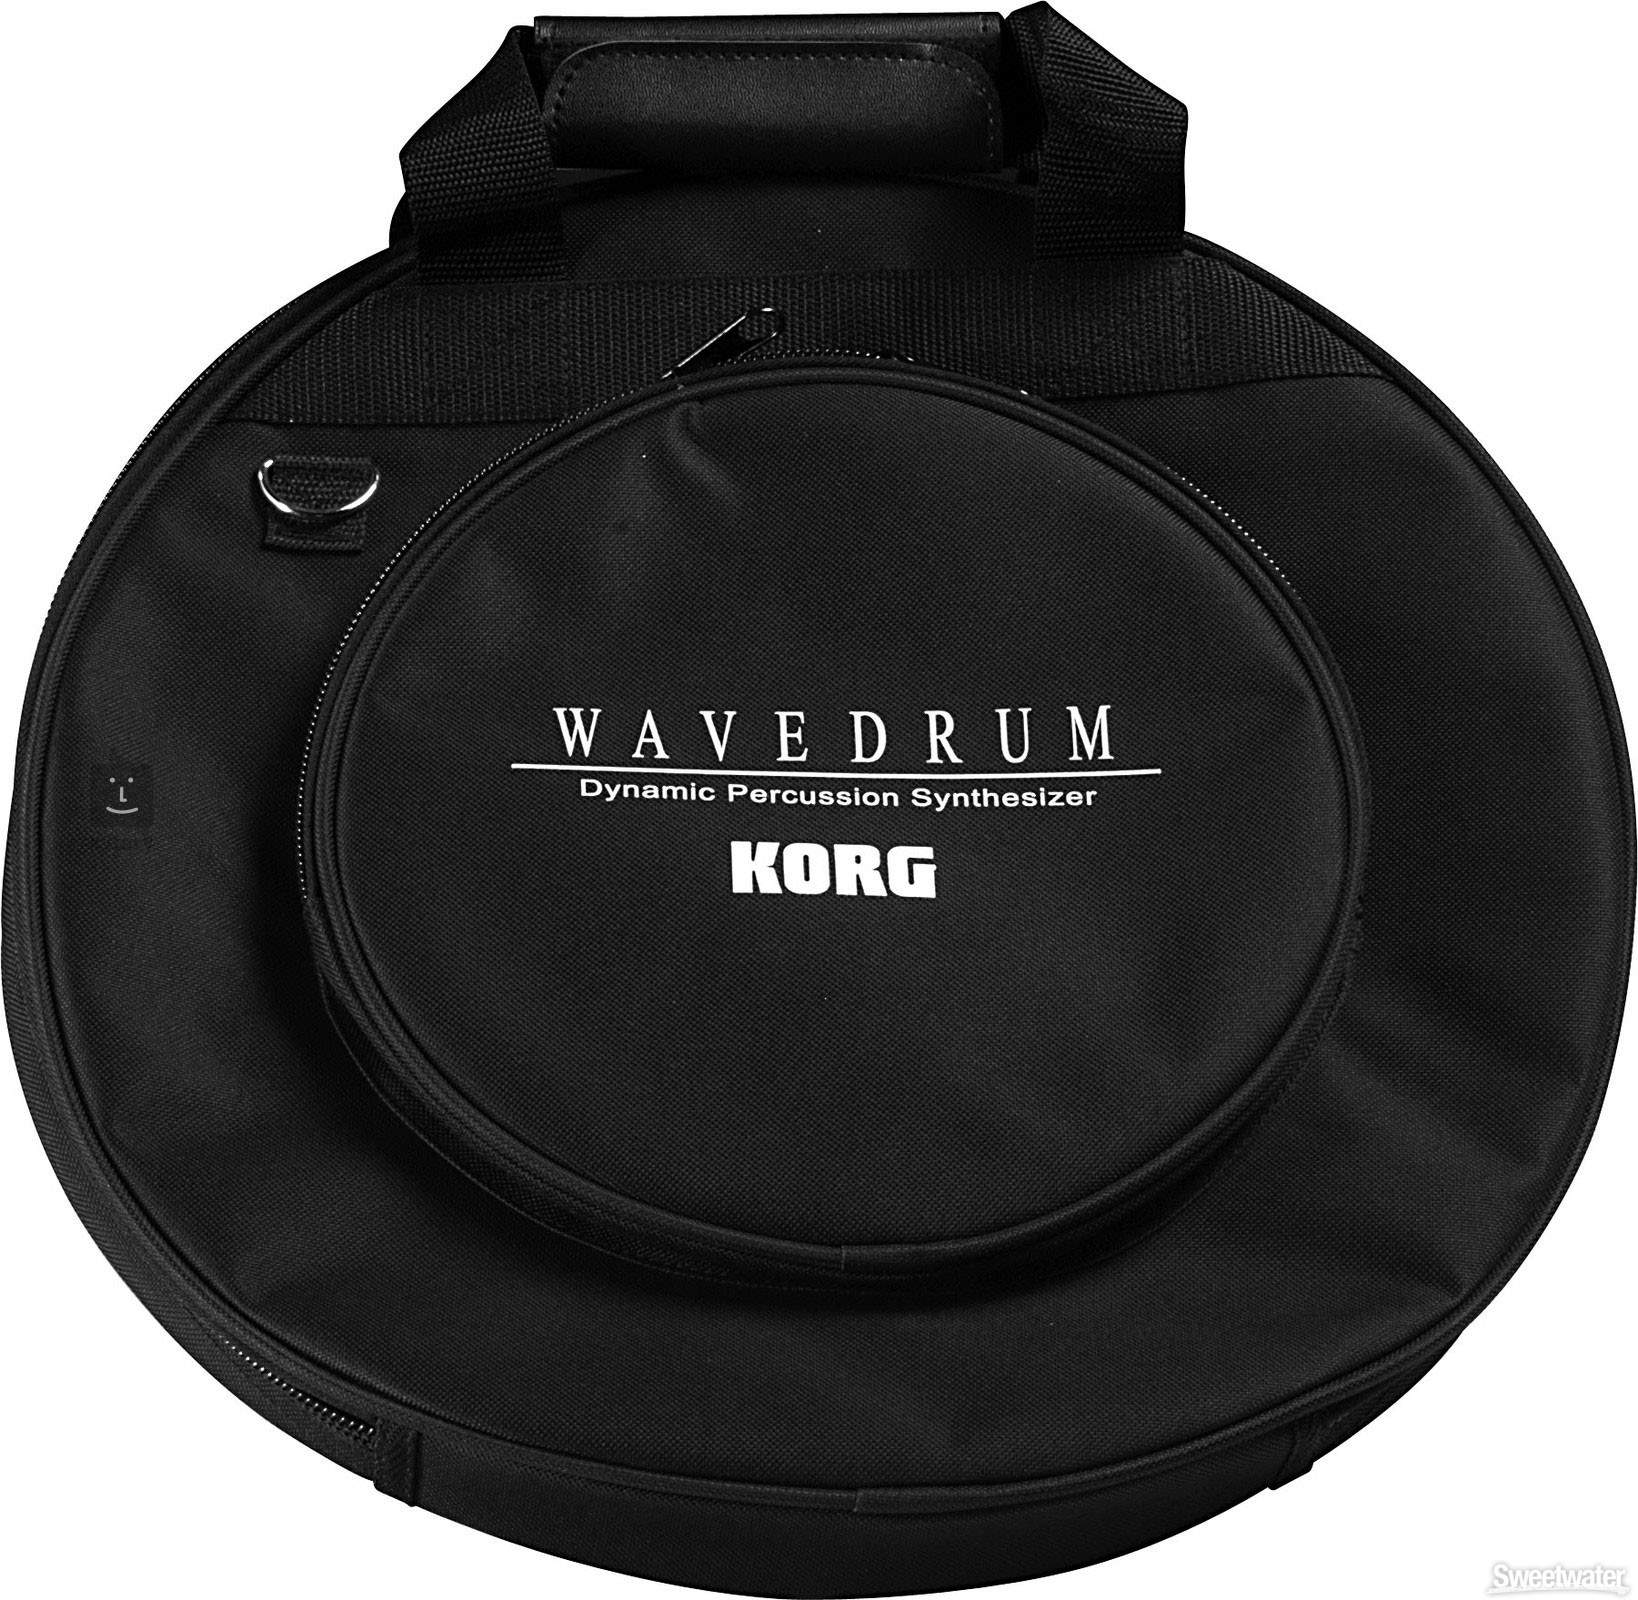 Korg Wave Drum Percussion Synthesizer